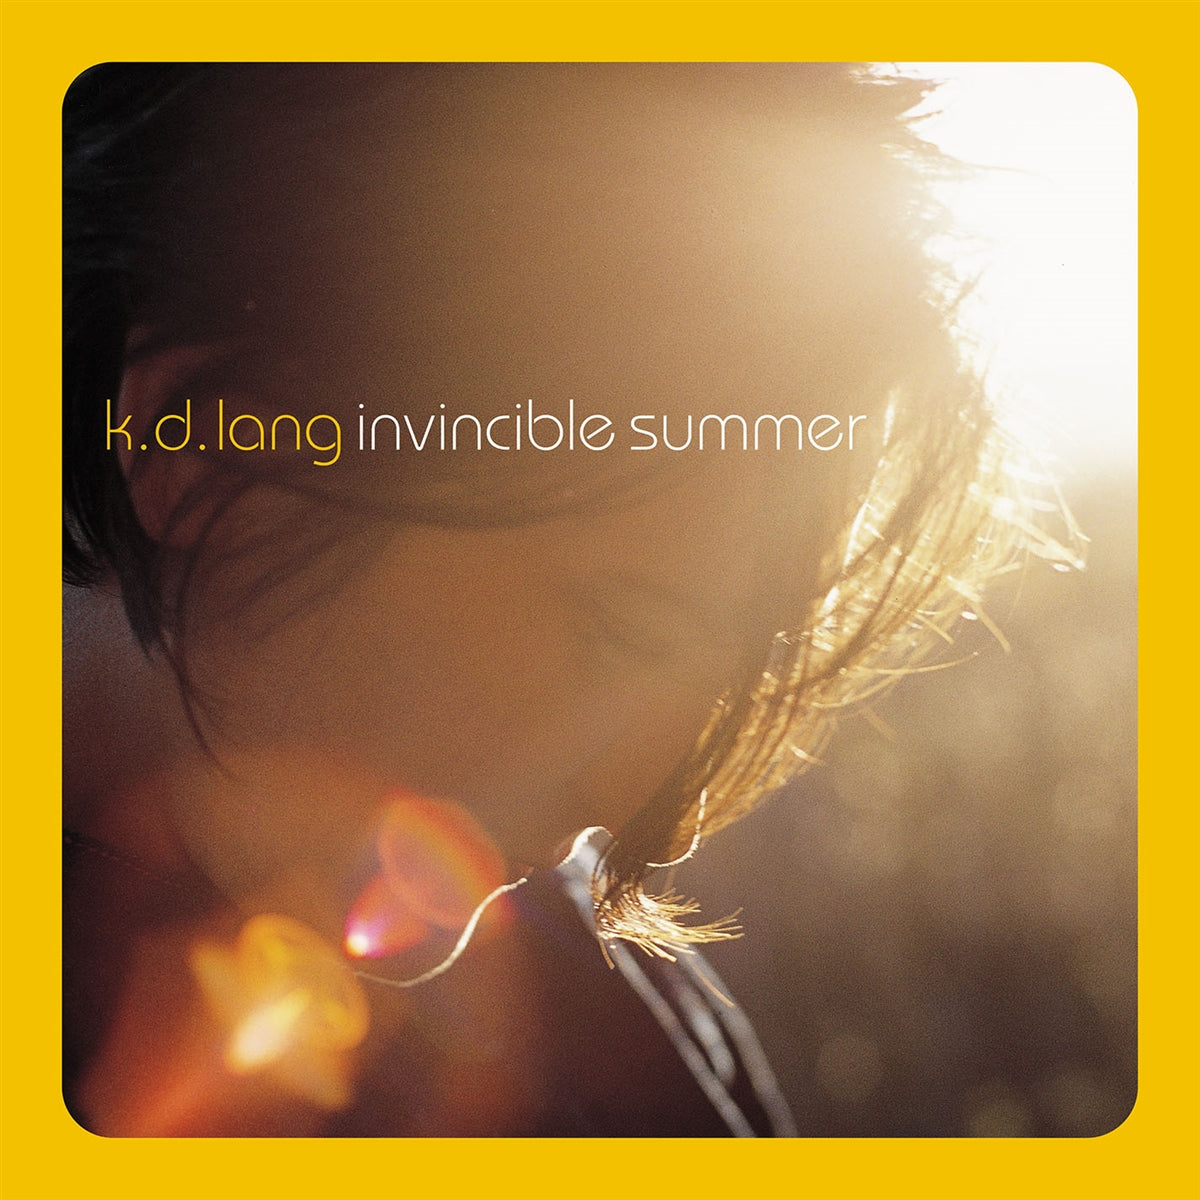 Kd lang Invincible Summer 20th Anniversary Edition (Yellow Flame colored vinyl; SYEOR Exclusive) | Vinyl